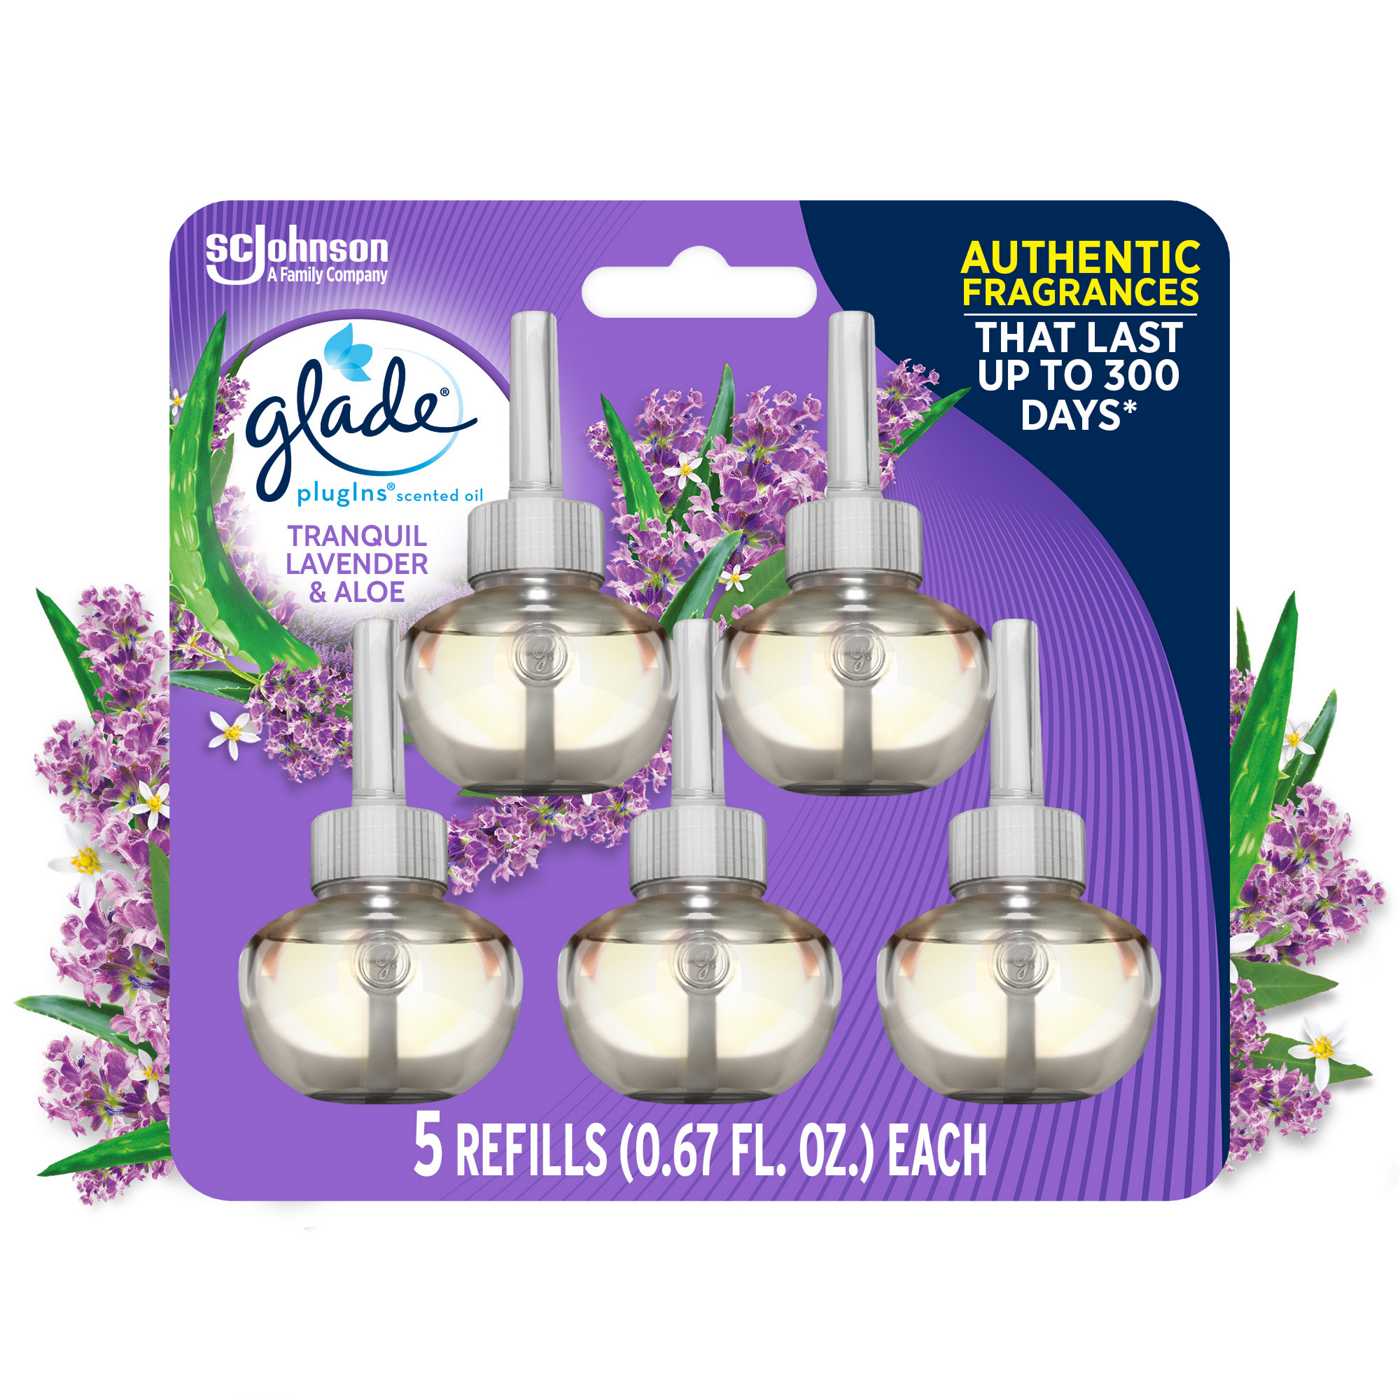 Glade PlugIns Scented Oil Air Freshener Refills - Tranquil Lavender & Aloe; image 1 of 2